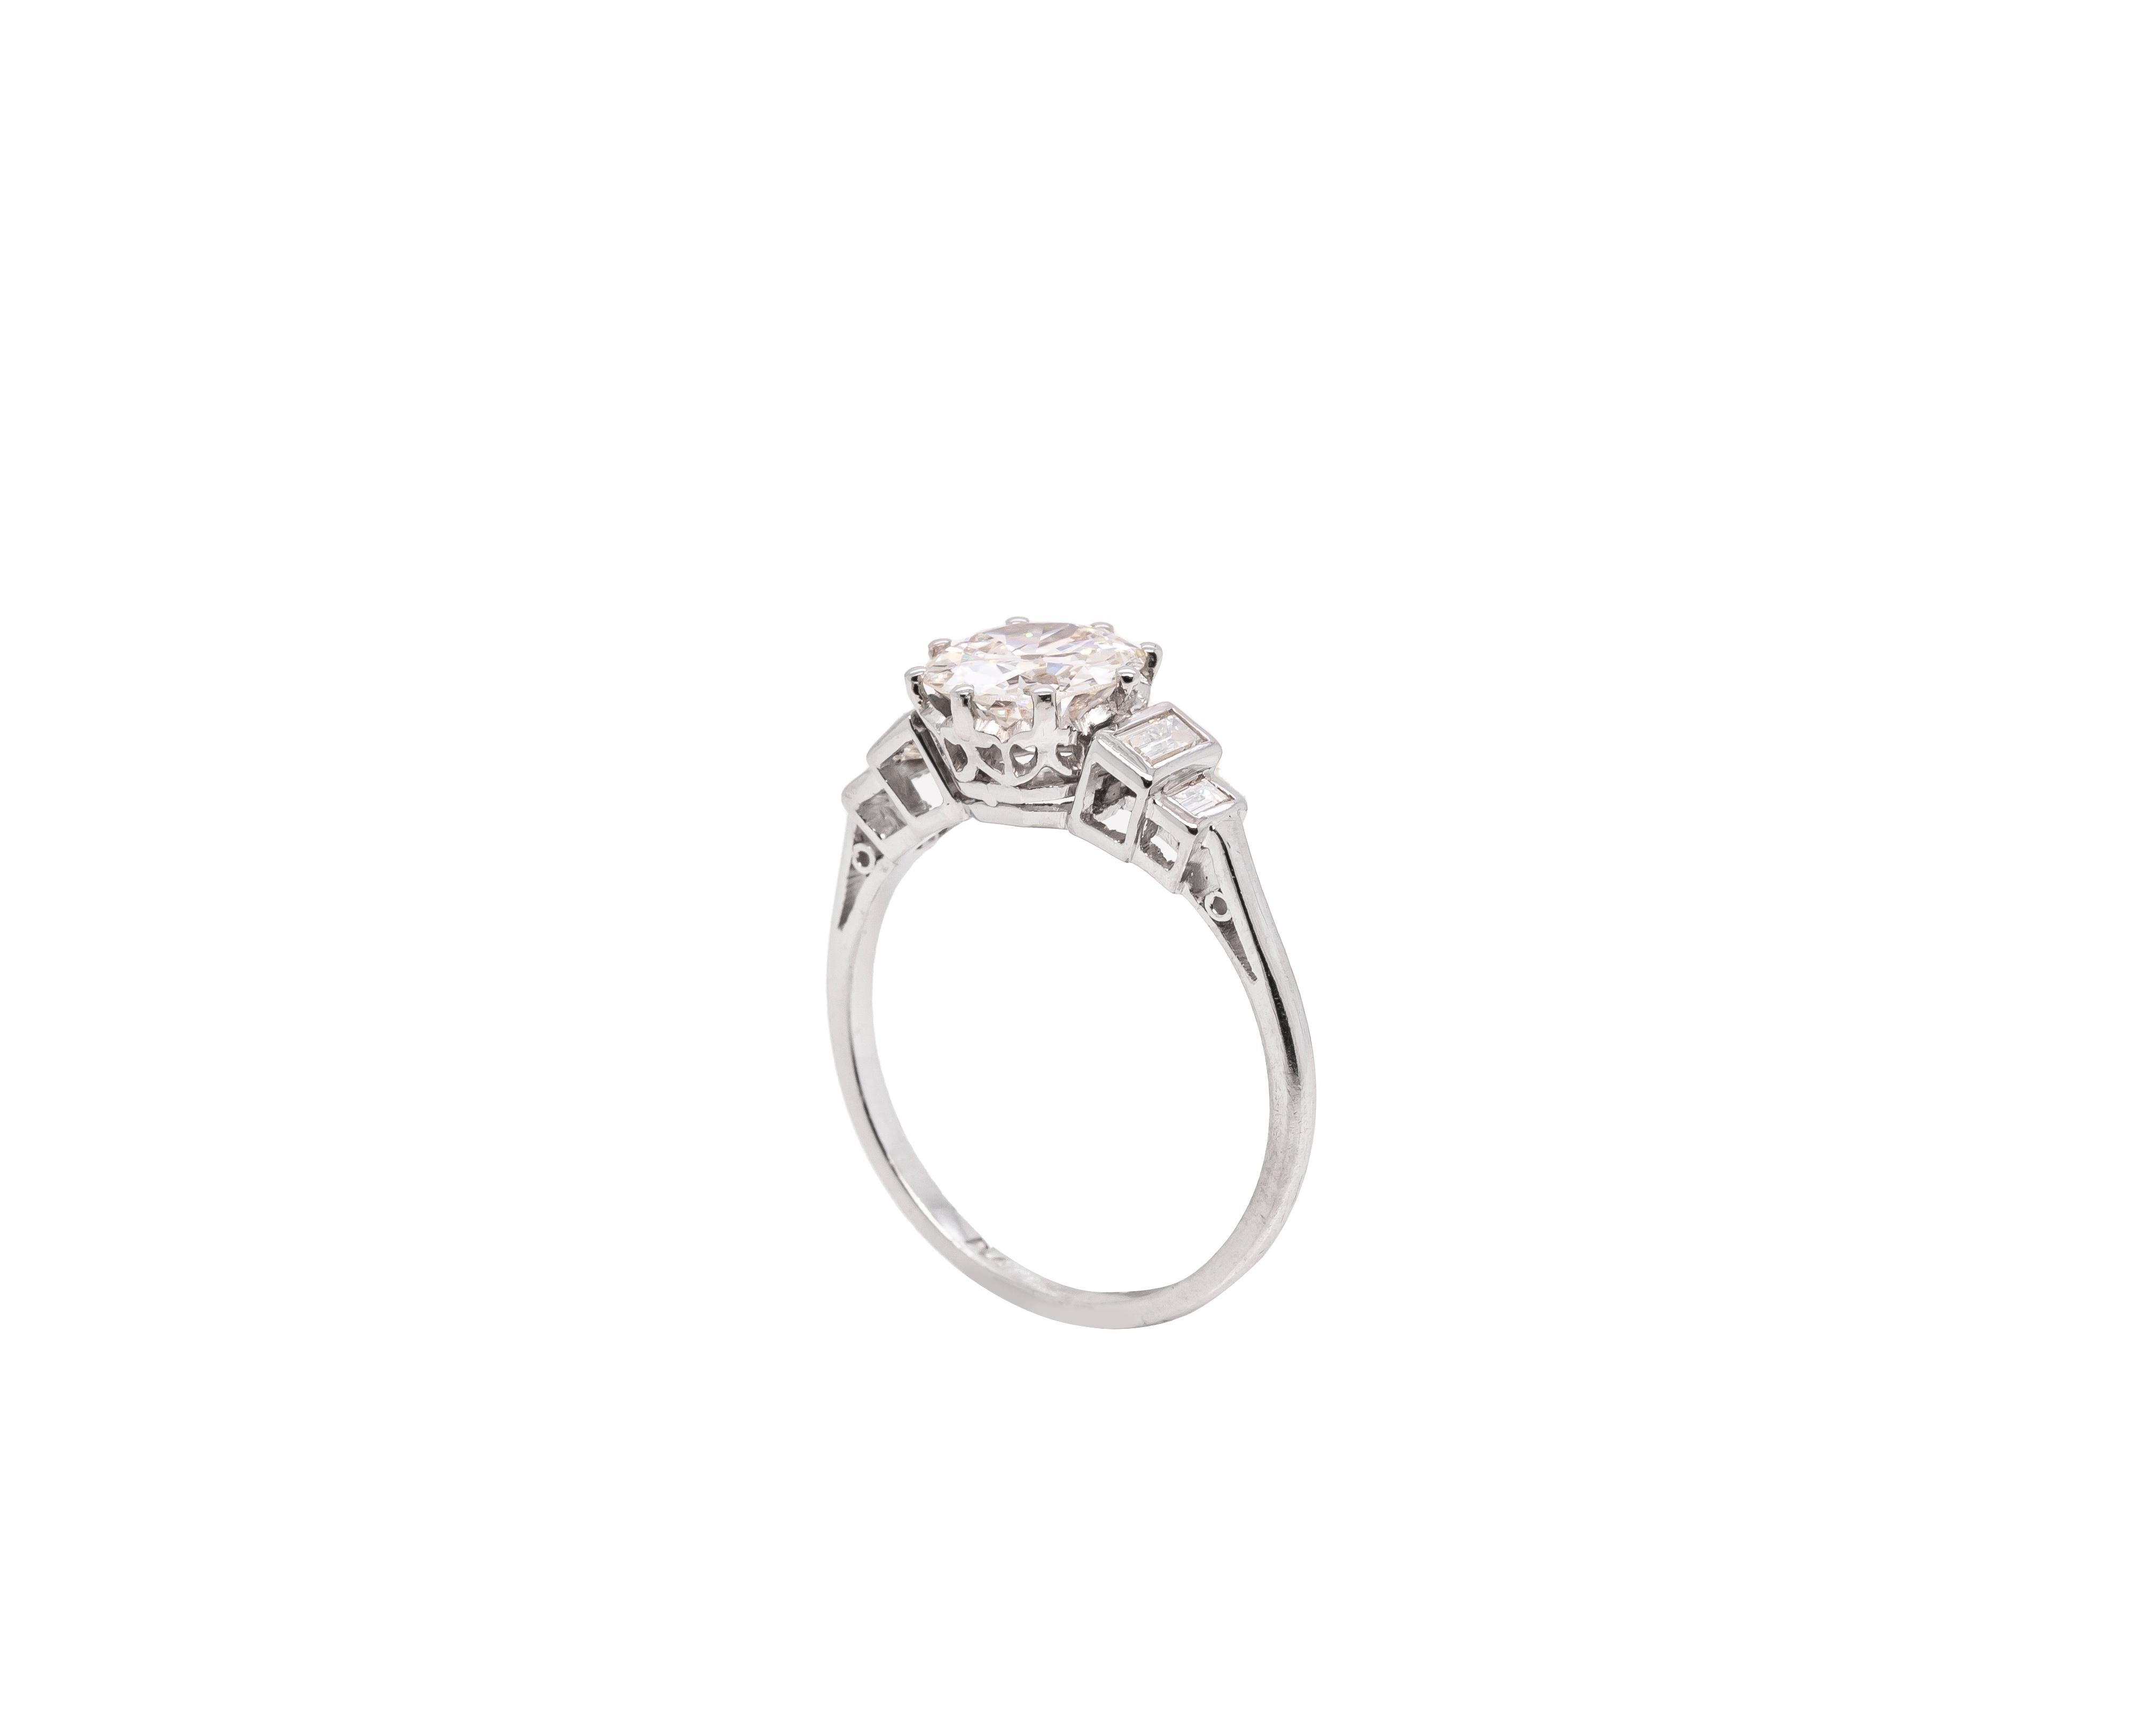 This spectacular antique solitaire engagement ring features a beautiful old European cut diamond weighing 1.72 carat mounted in an eight claw, open back setting. The diamond is perfectly accompanied by two baguette cut diamond steps on either side